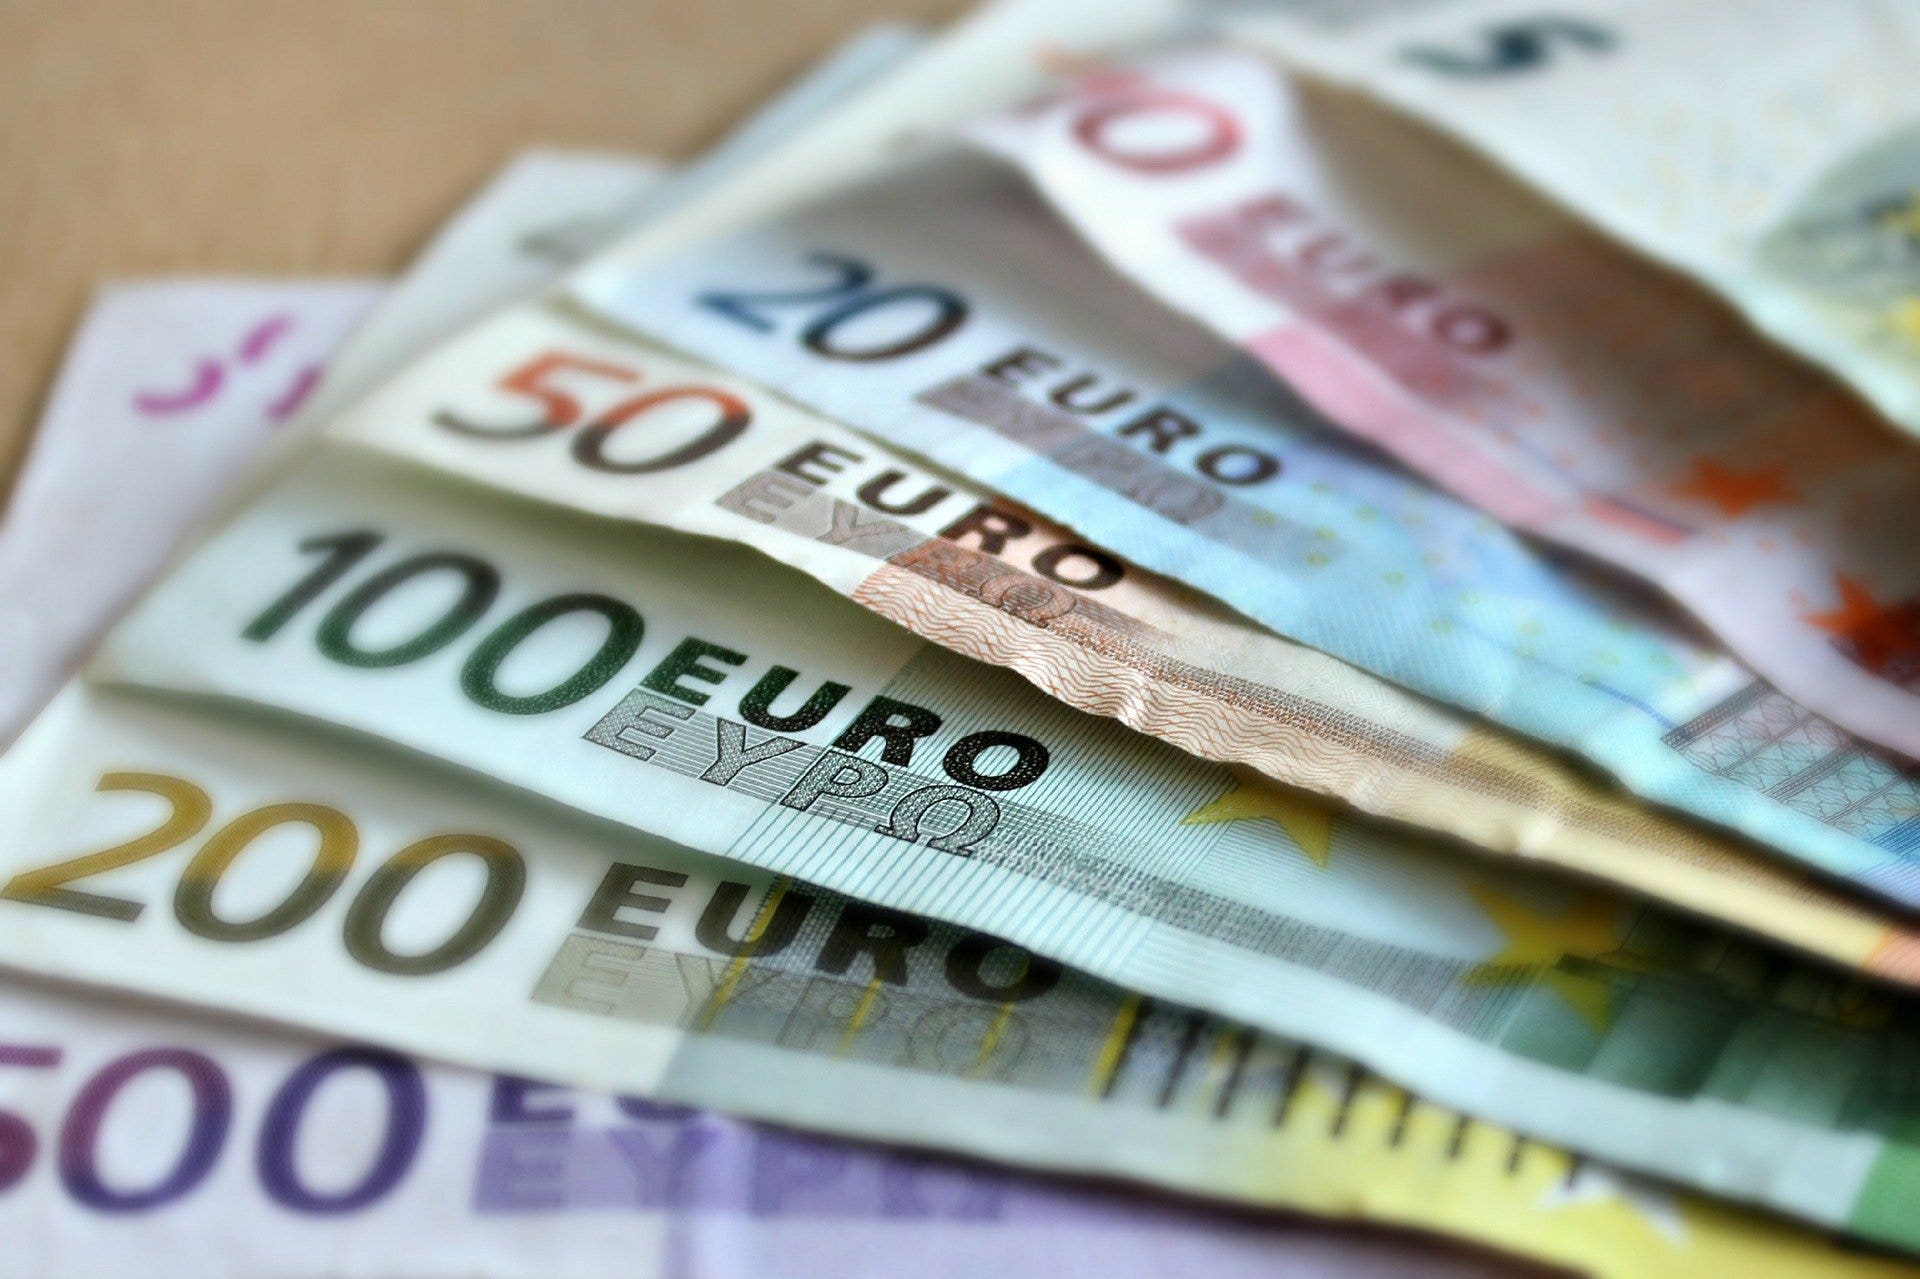 EUR/USD Forecast: Neutral In The Near-Term, Faces Strong Resistance In The 1.2180 Region